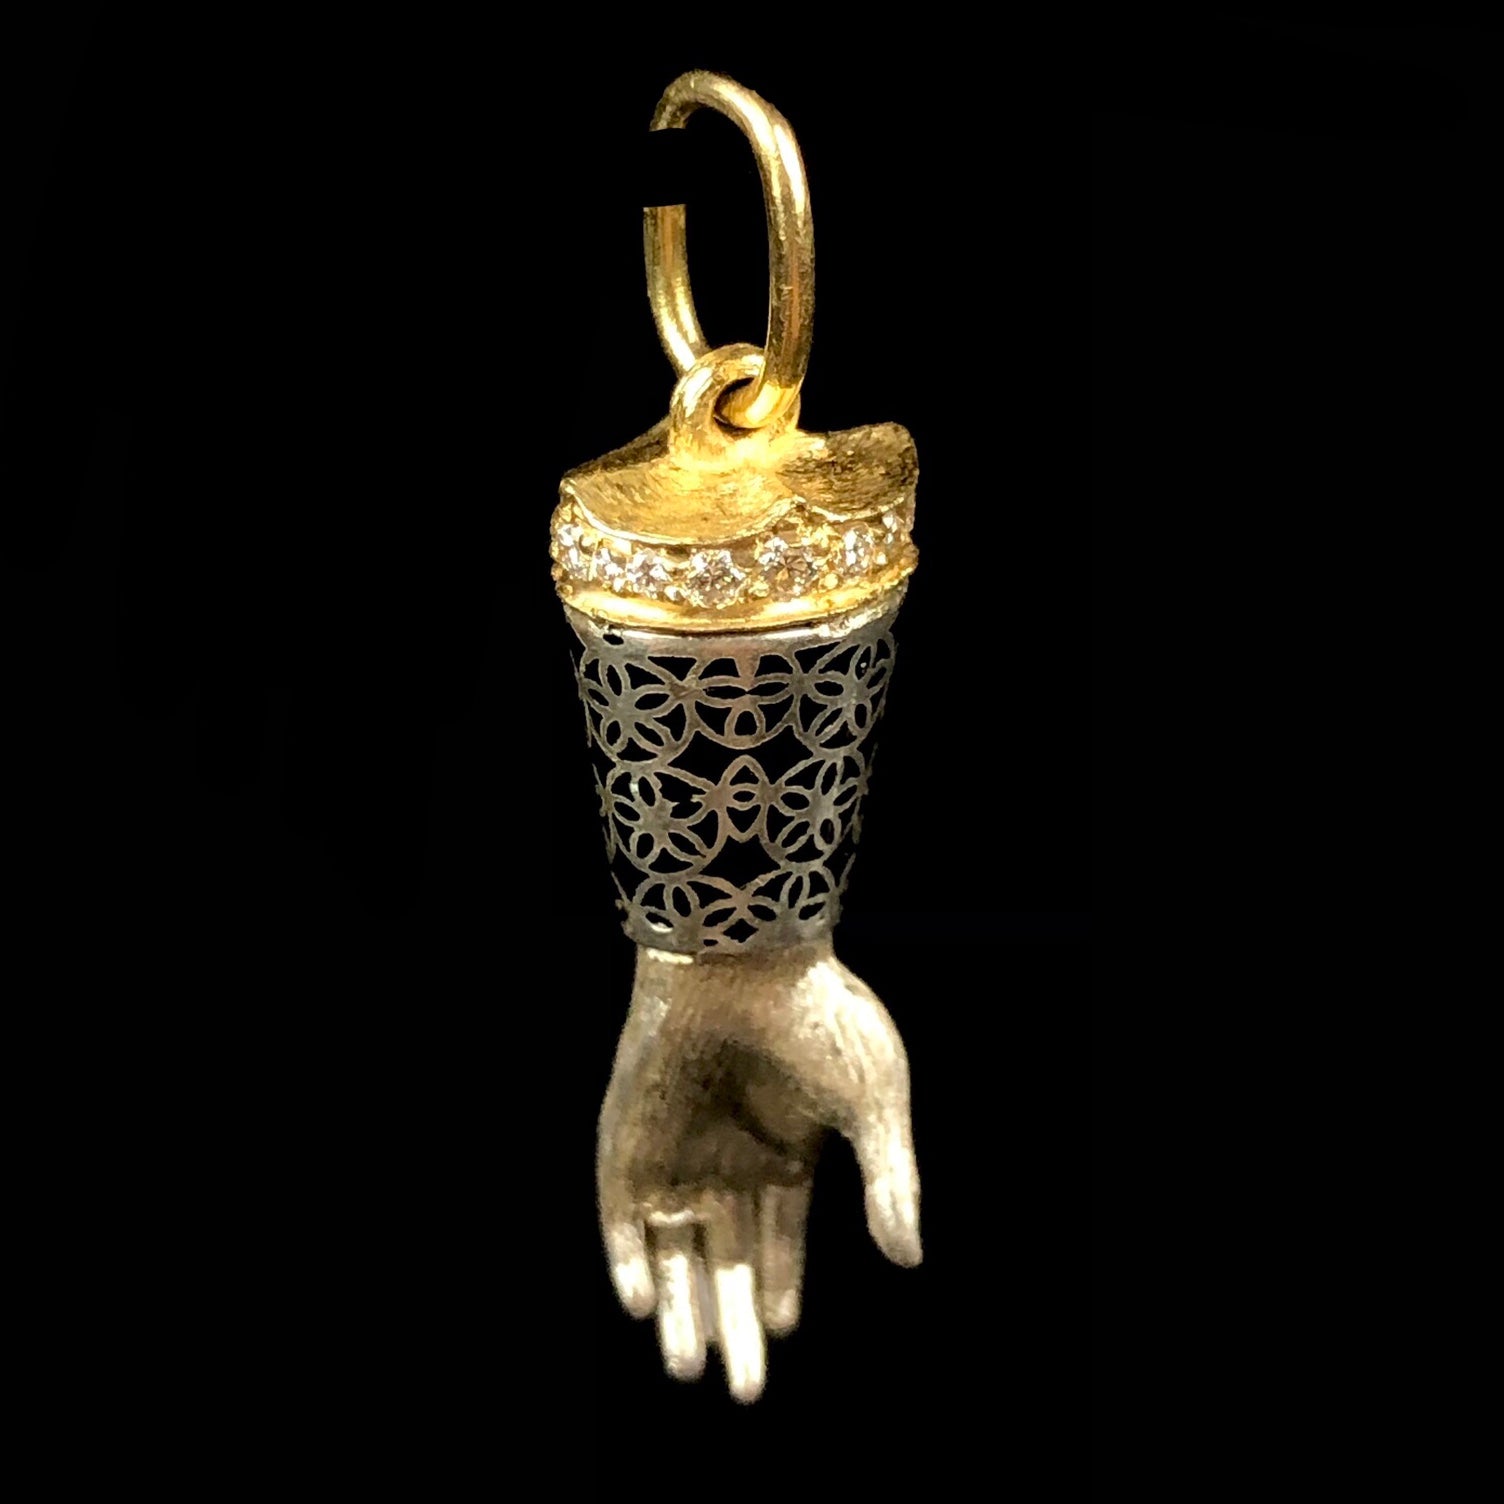 Top view of gold cap on Black Enamel hand Charm